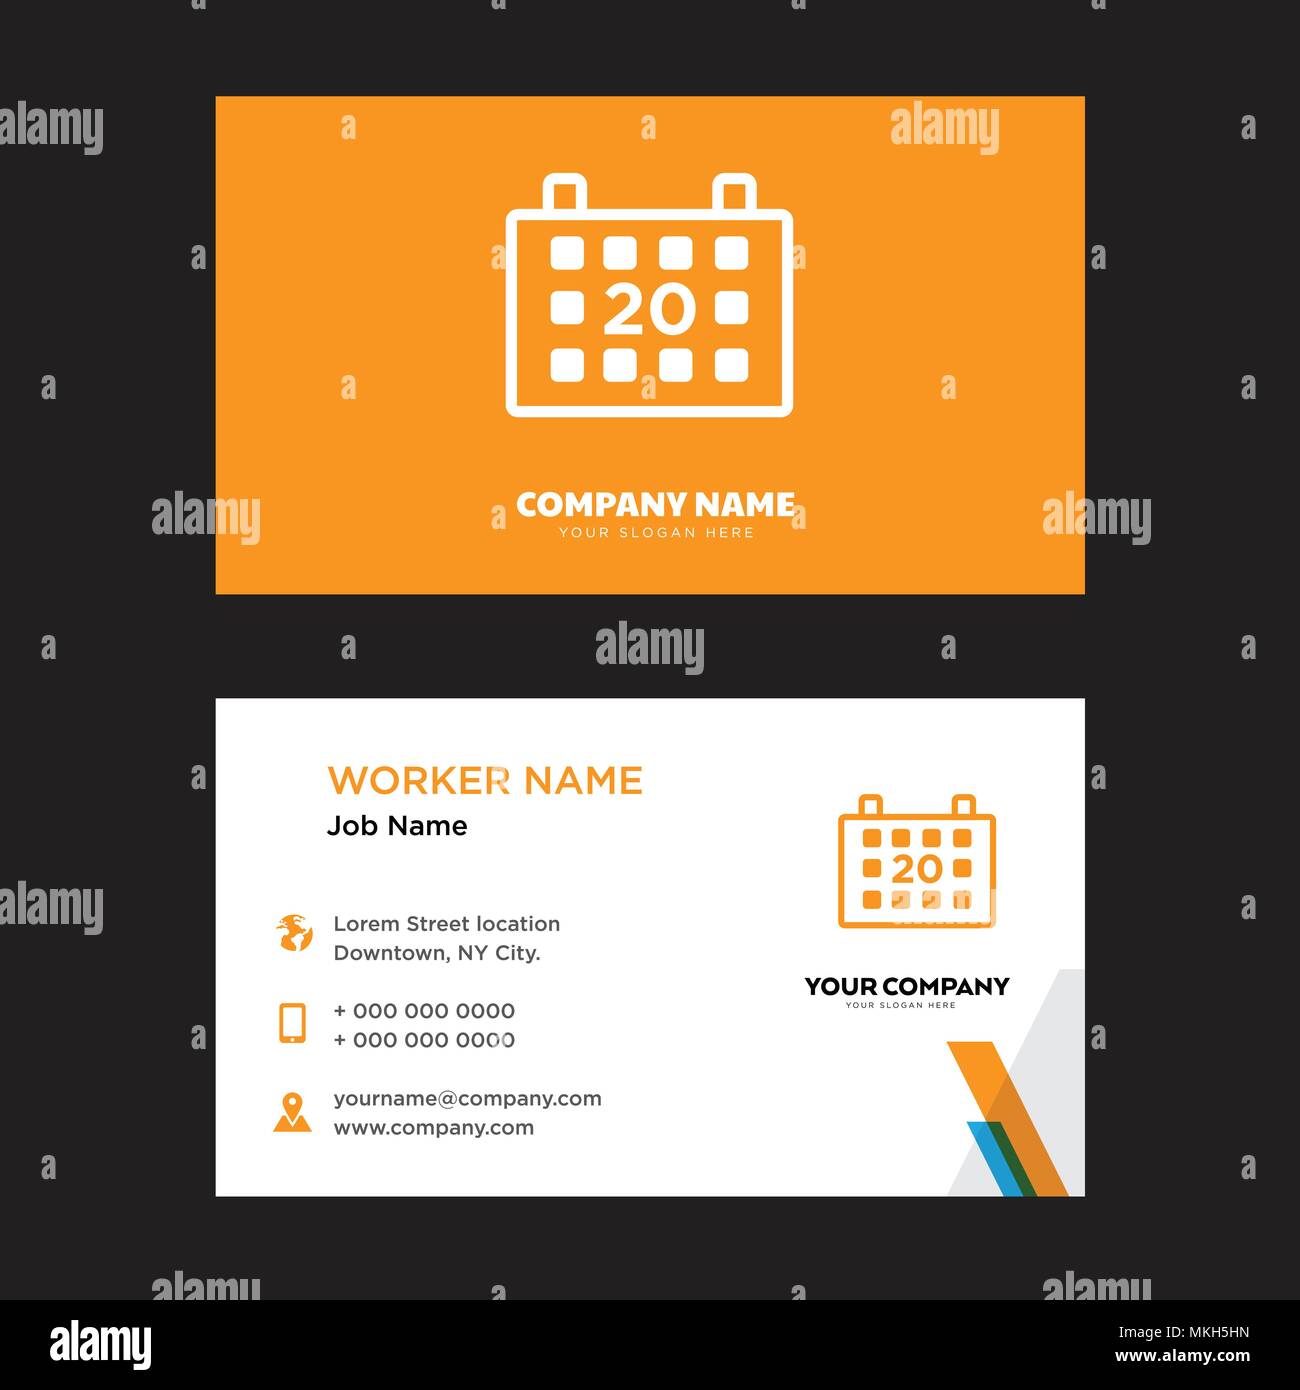 Calendar business card design template, Visiting for your company